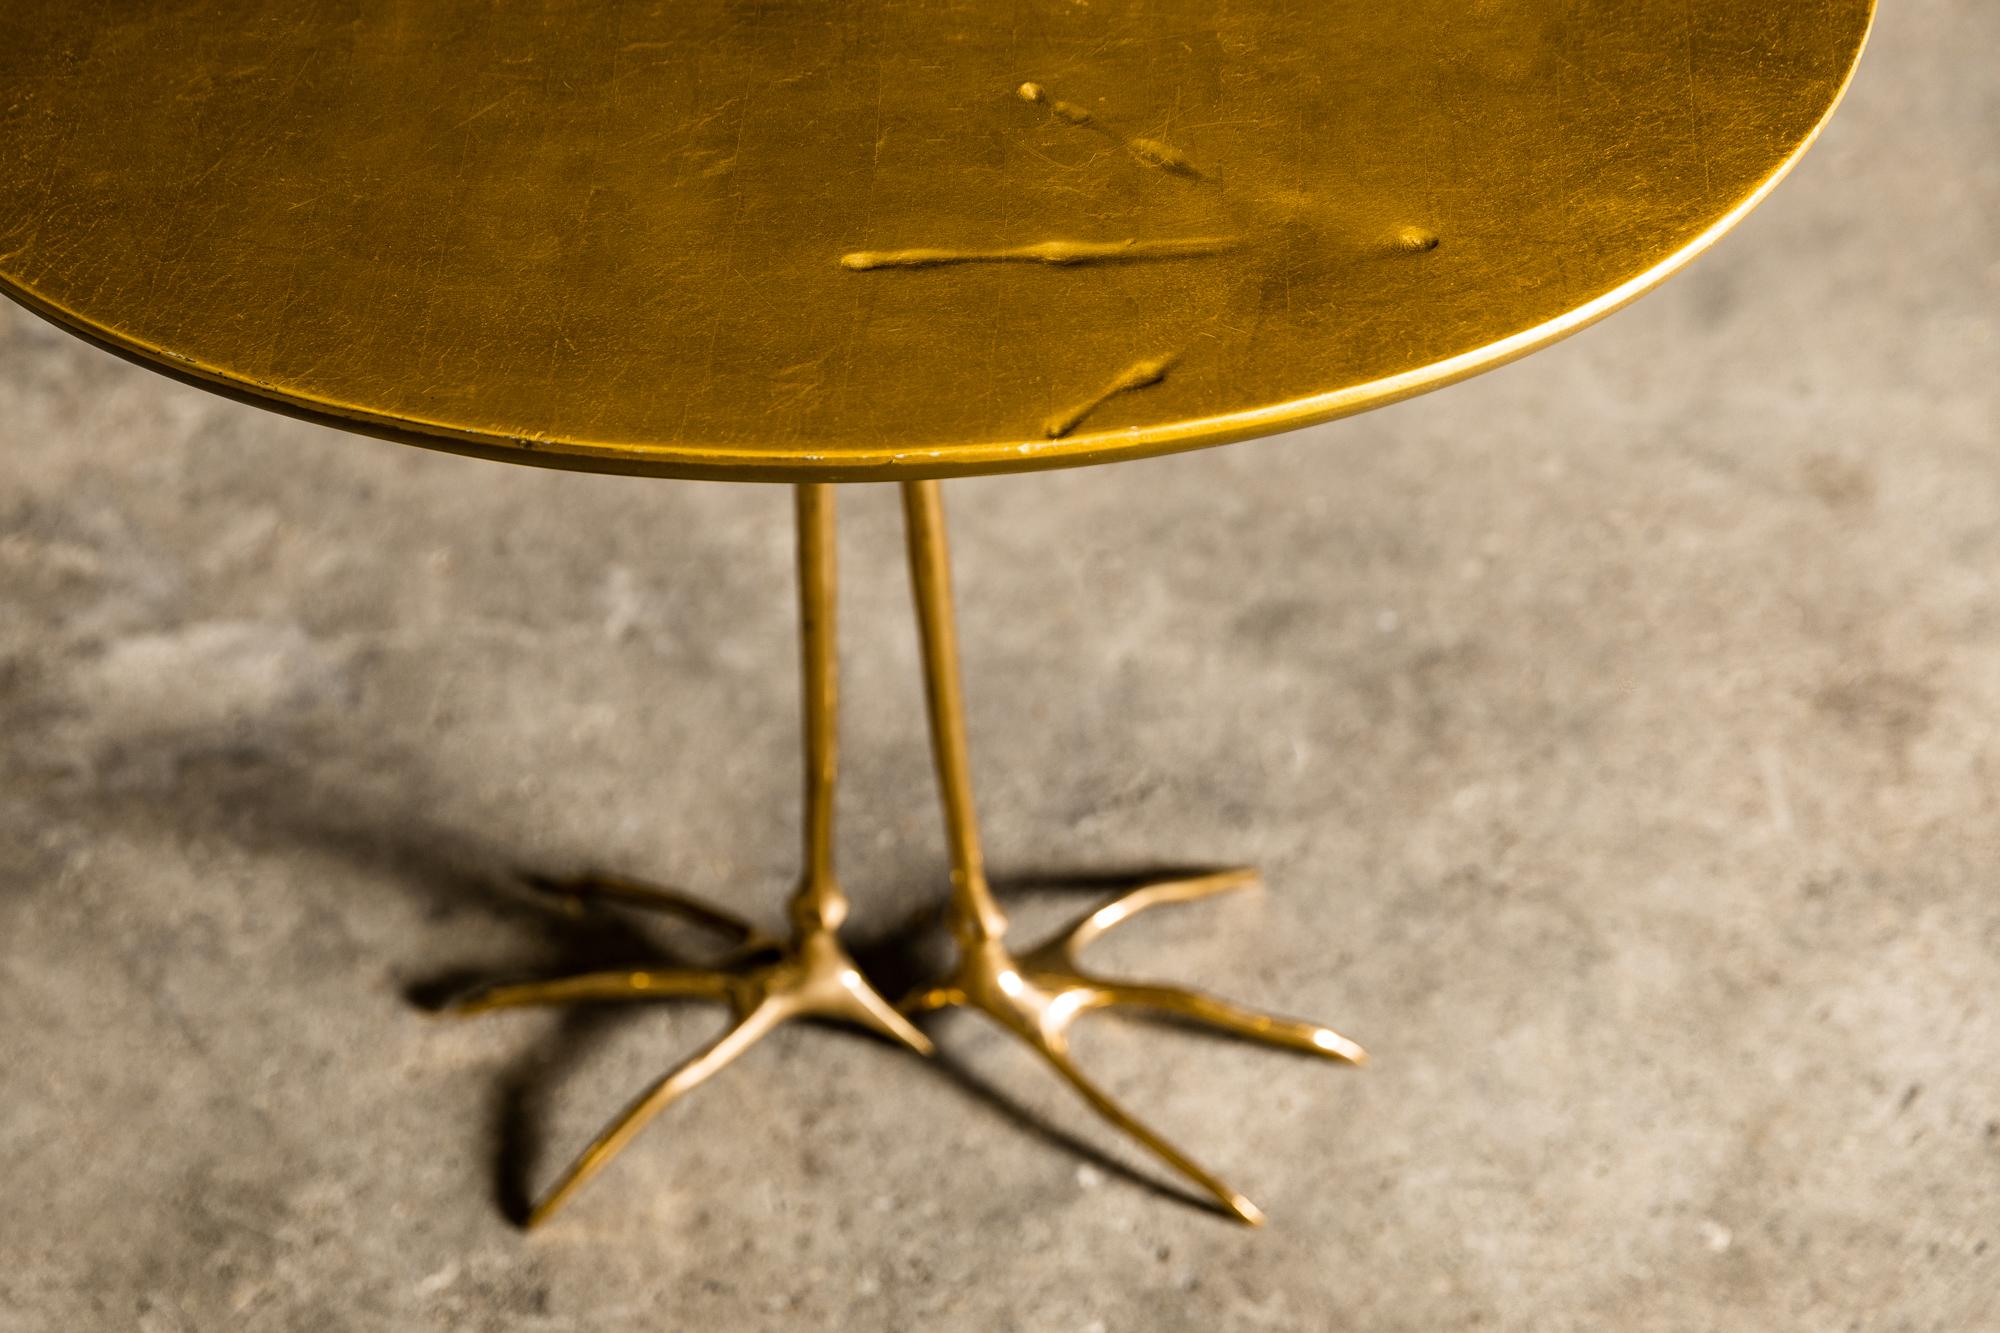 Designed in 1939 by Surrealist artist Meret Oppenheim the Traccia table is very distinctive. The table is an abstract representation of a bird even though it is without its body, the elements such as the legs the marks and the egg. The name Traccia